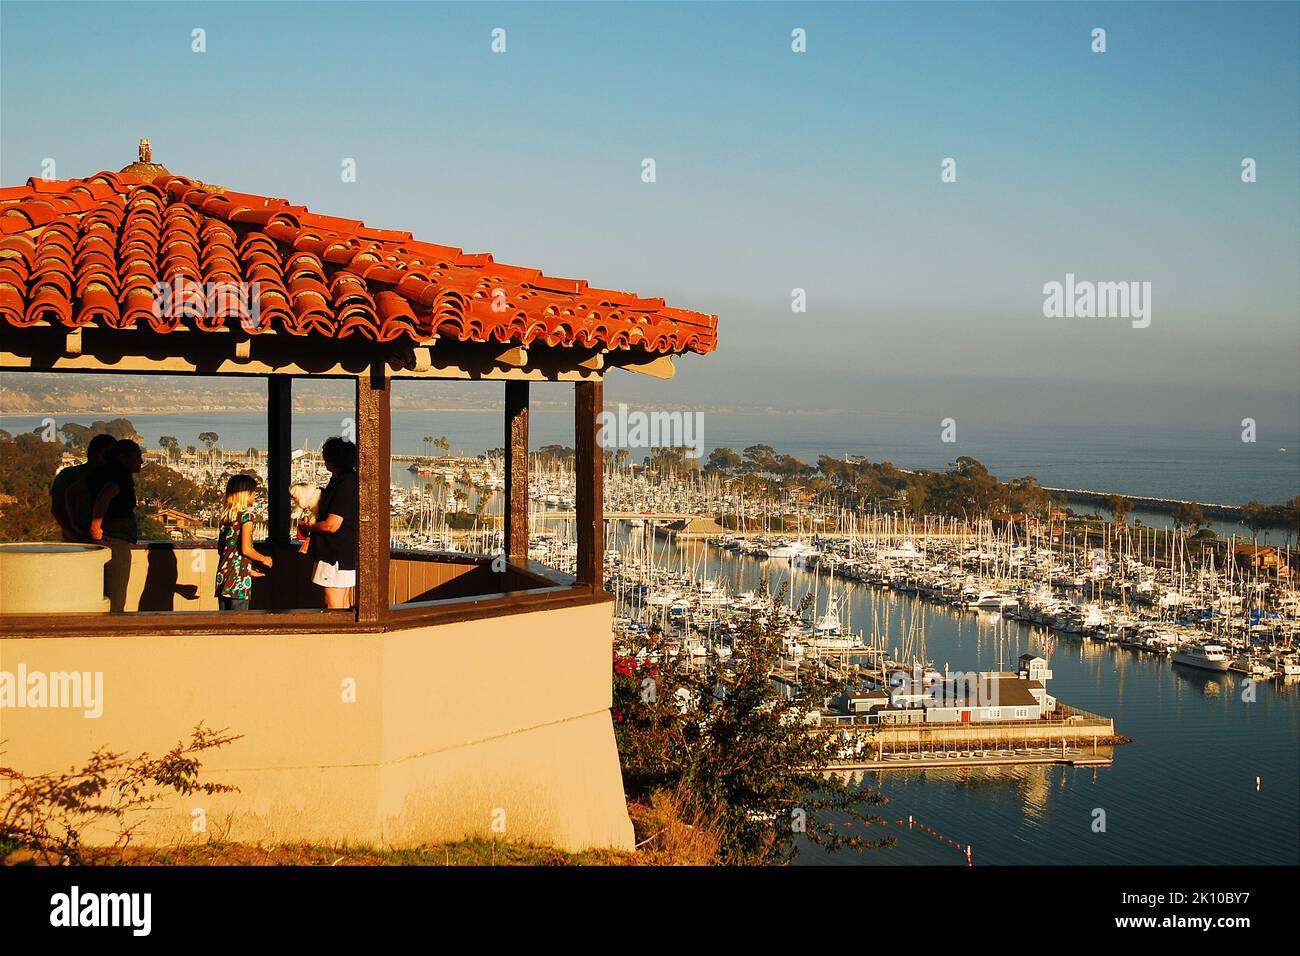 Friends enjoy a shaded seat under a red tiled gazebo that overlooks the beautiful harbor of Dana Point, Colifornia Stock Photo